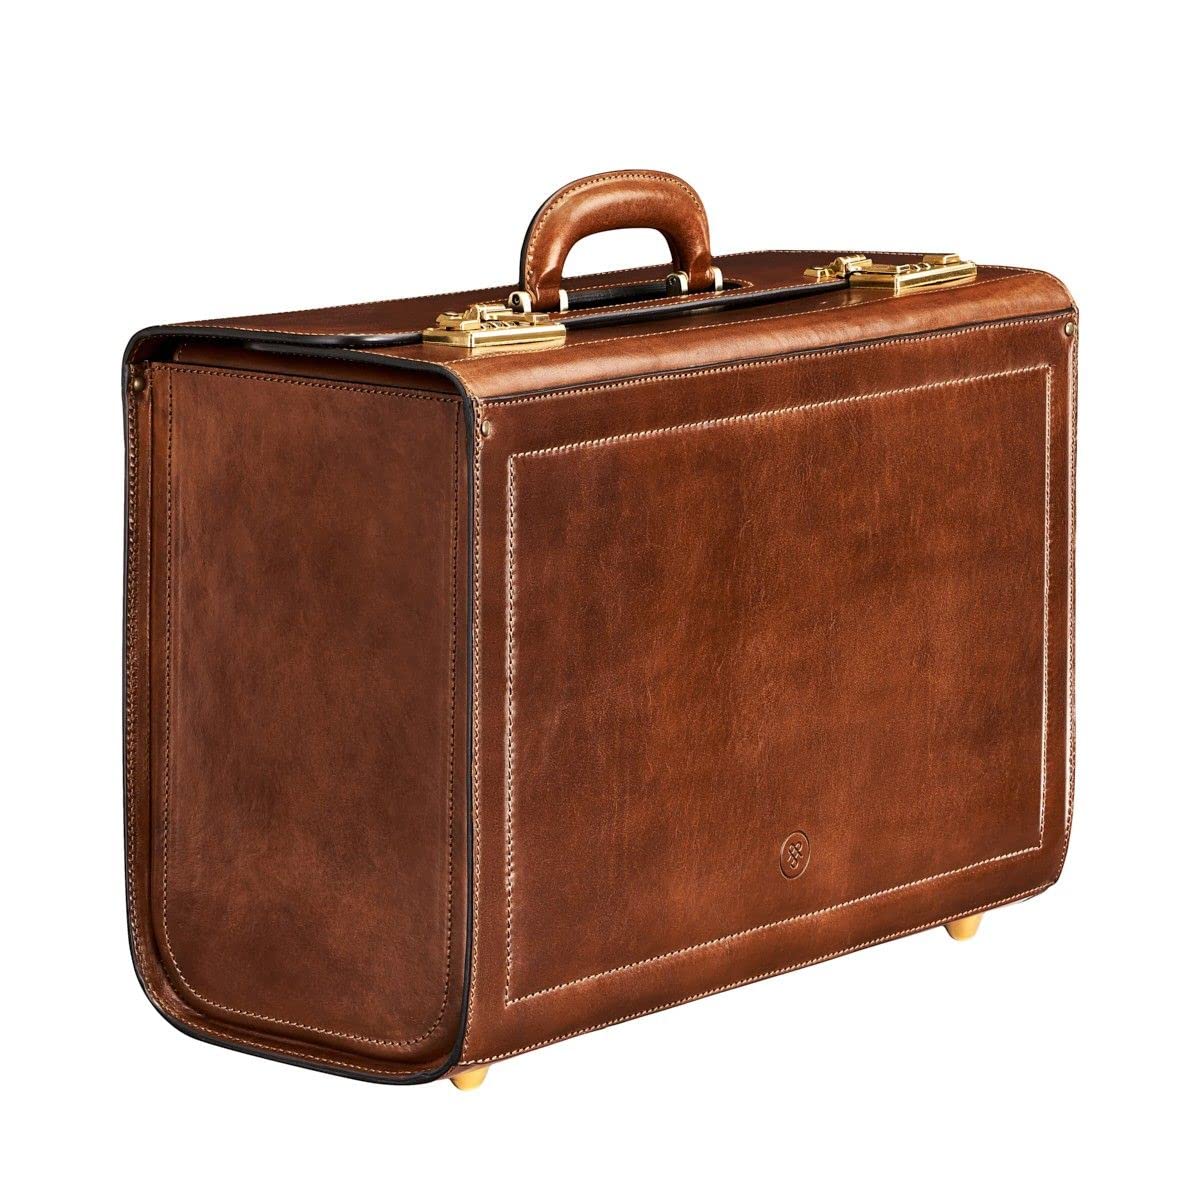 Maxwell Scott - Personalized Mens Luxury Leather Pilot Briefcase/Catalog Case with Combination Lock - The Varese - Chestnut Tan